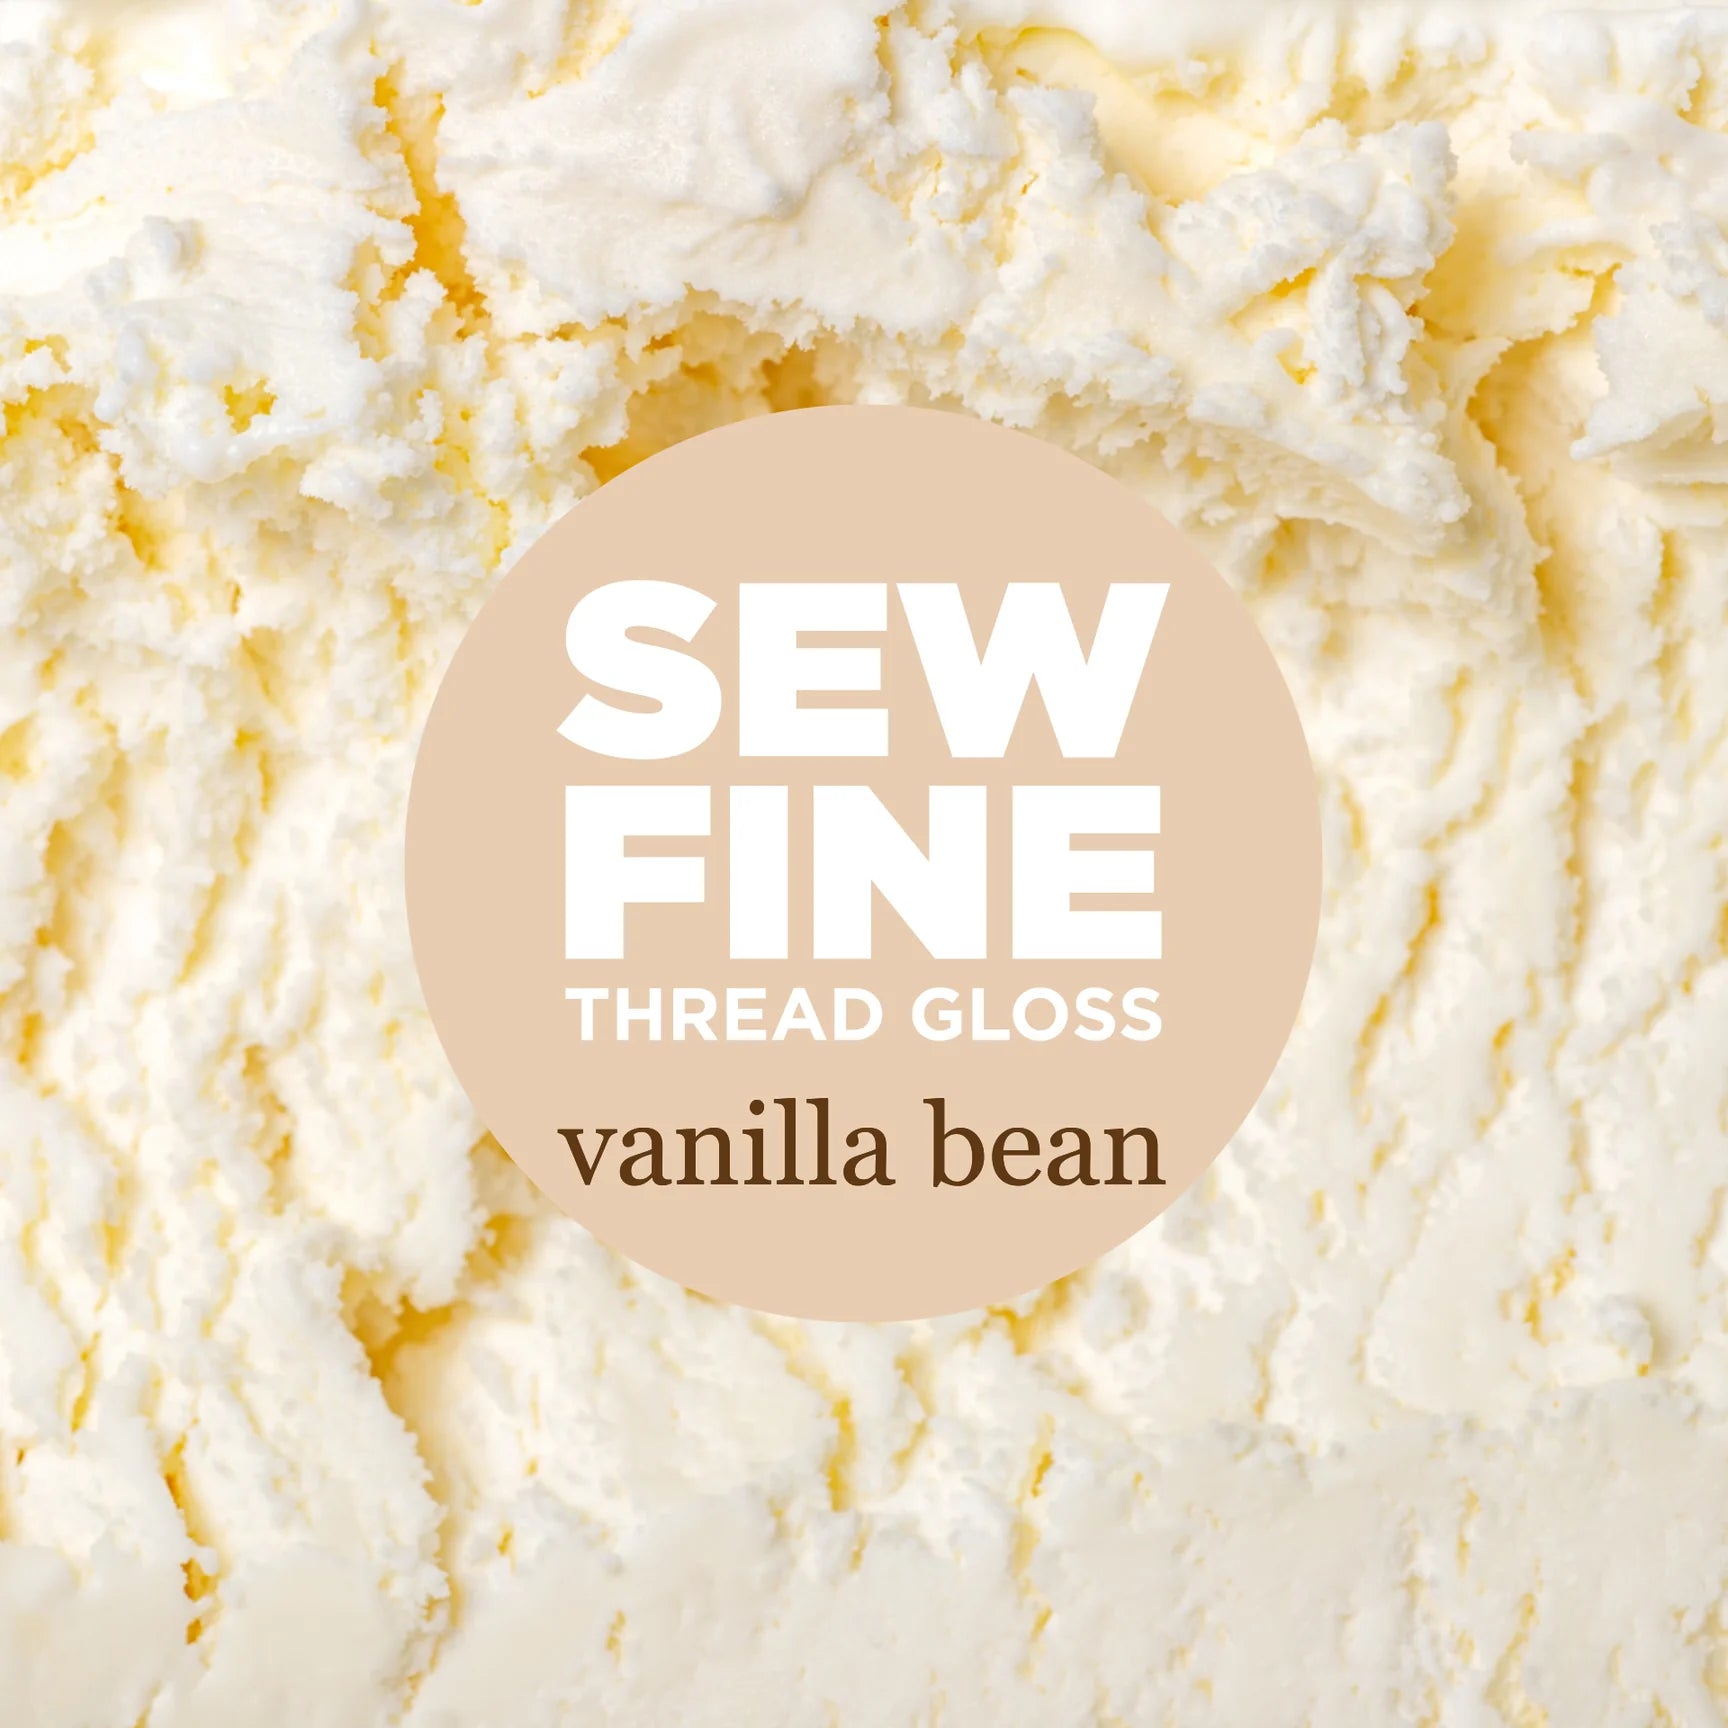 0.5oz pot of "Vanilla Bean" Sew Fine Thread Gloss. If you’re looking for a strong, true vanilla scent, this is the thread gloss for you!  No more tangled, knotted or static-y threads while you're hand-sewing!